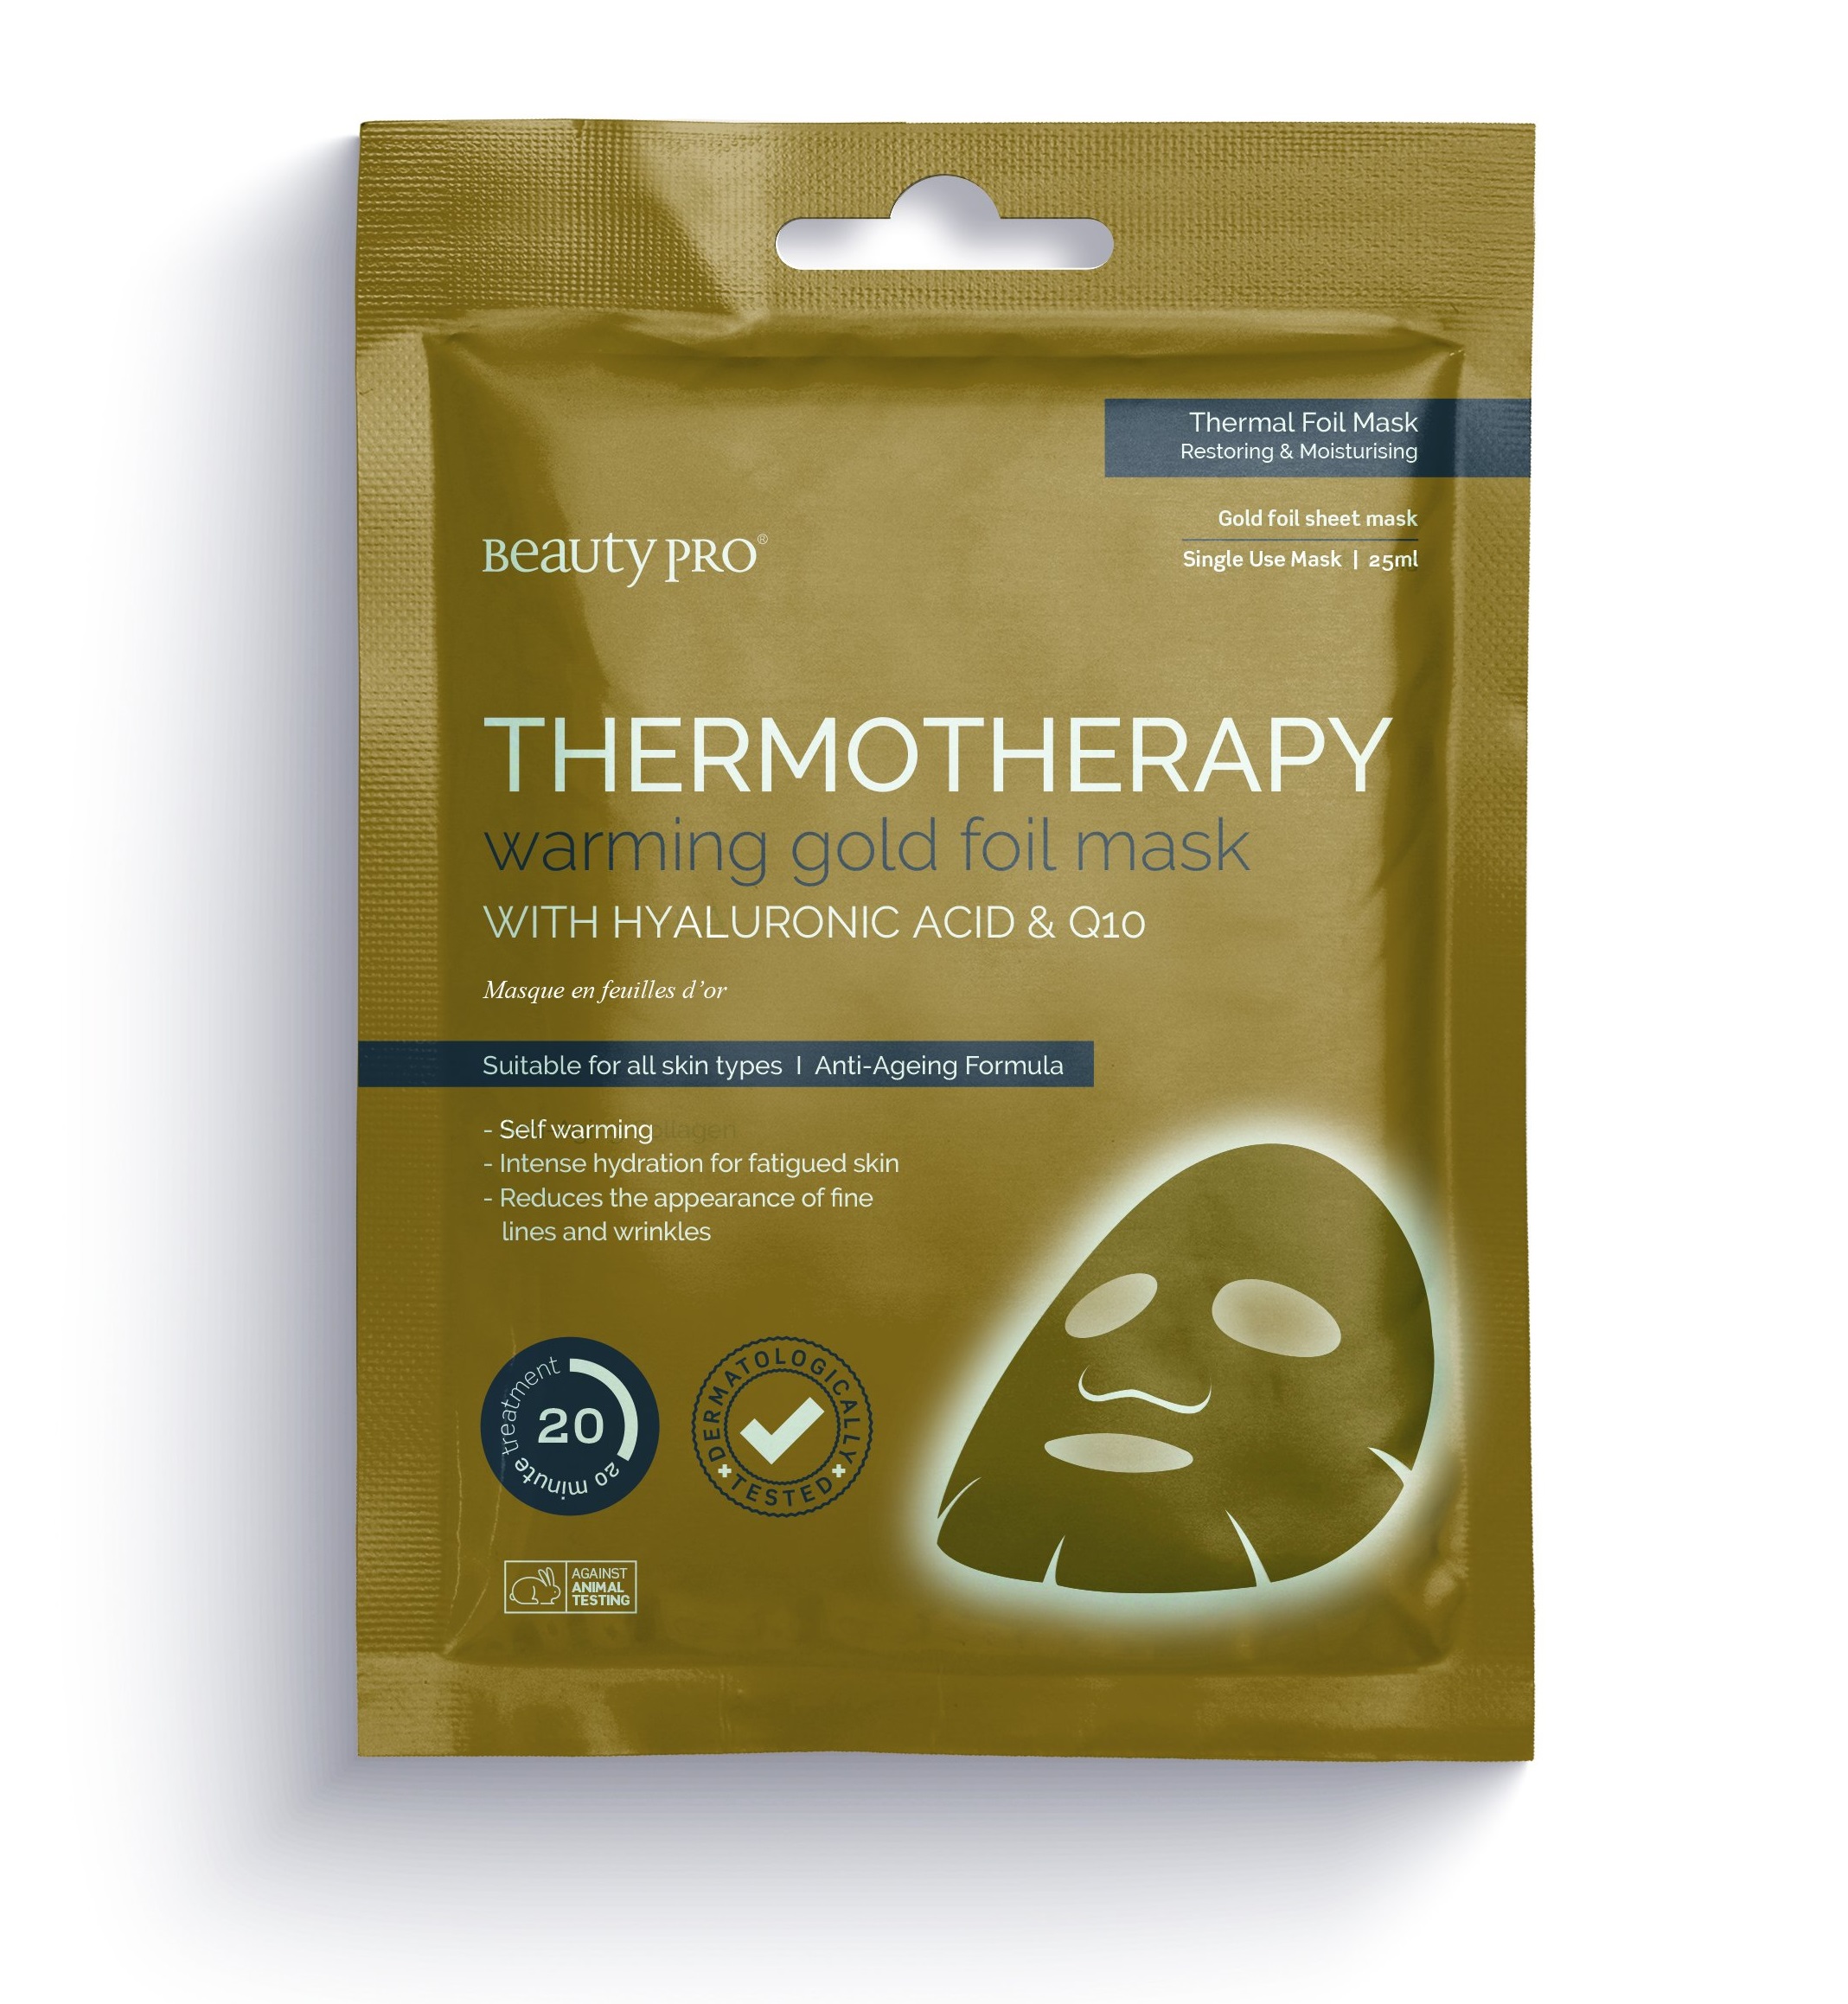 BeautyPro's Thermotherapy Warming Gold Foil Mask